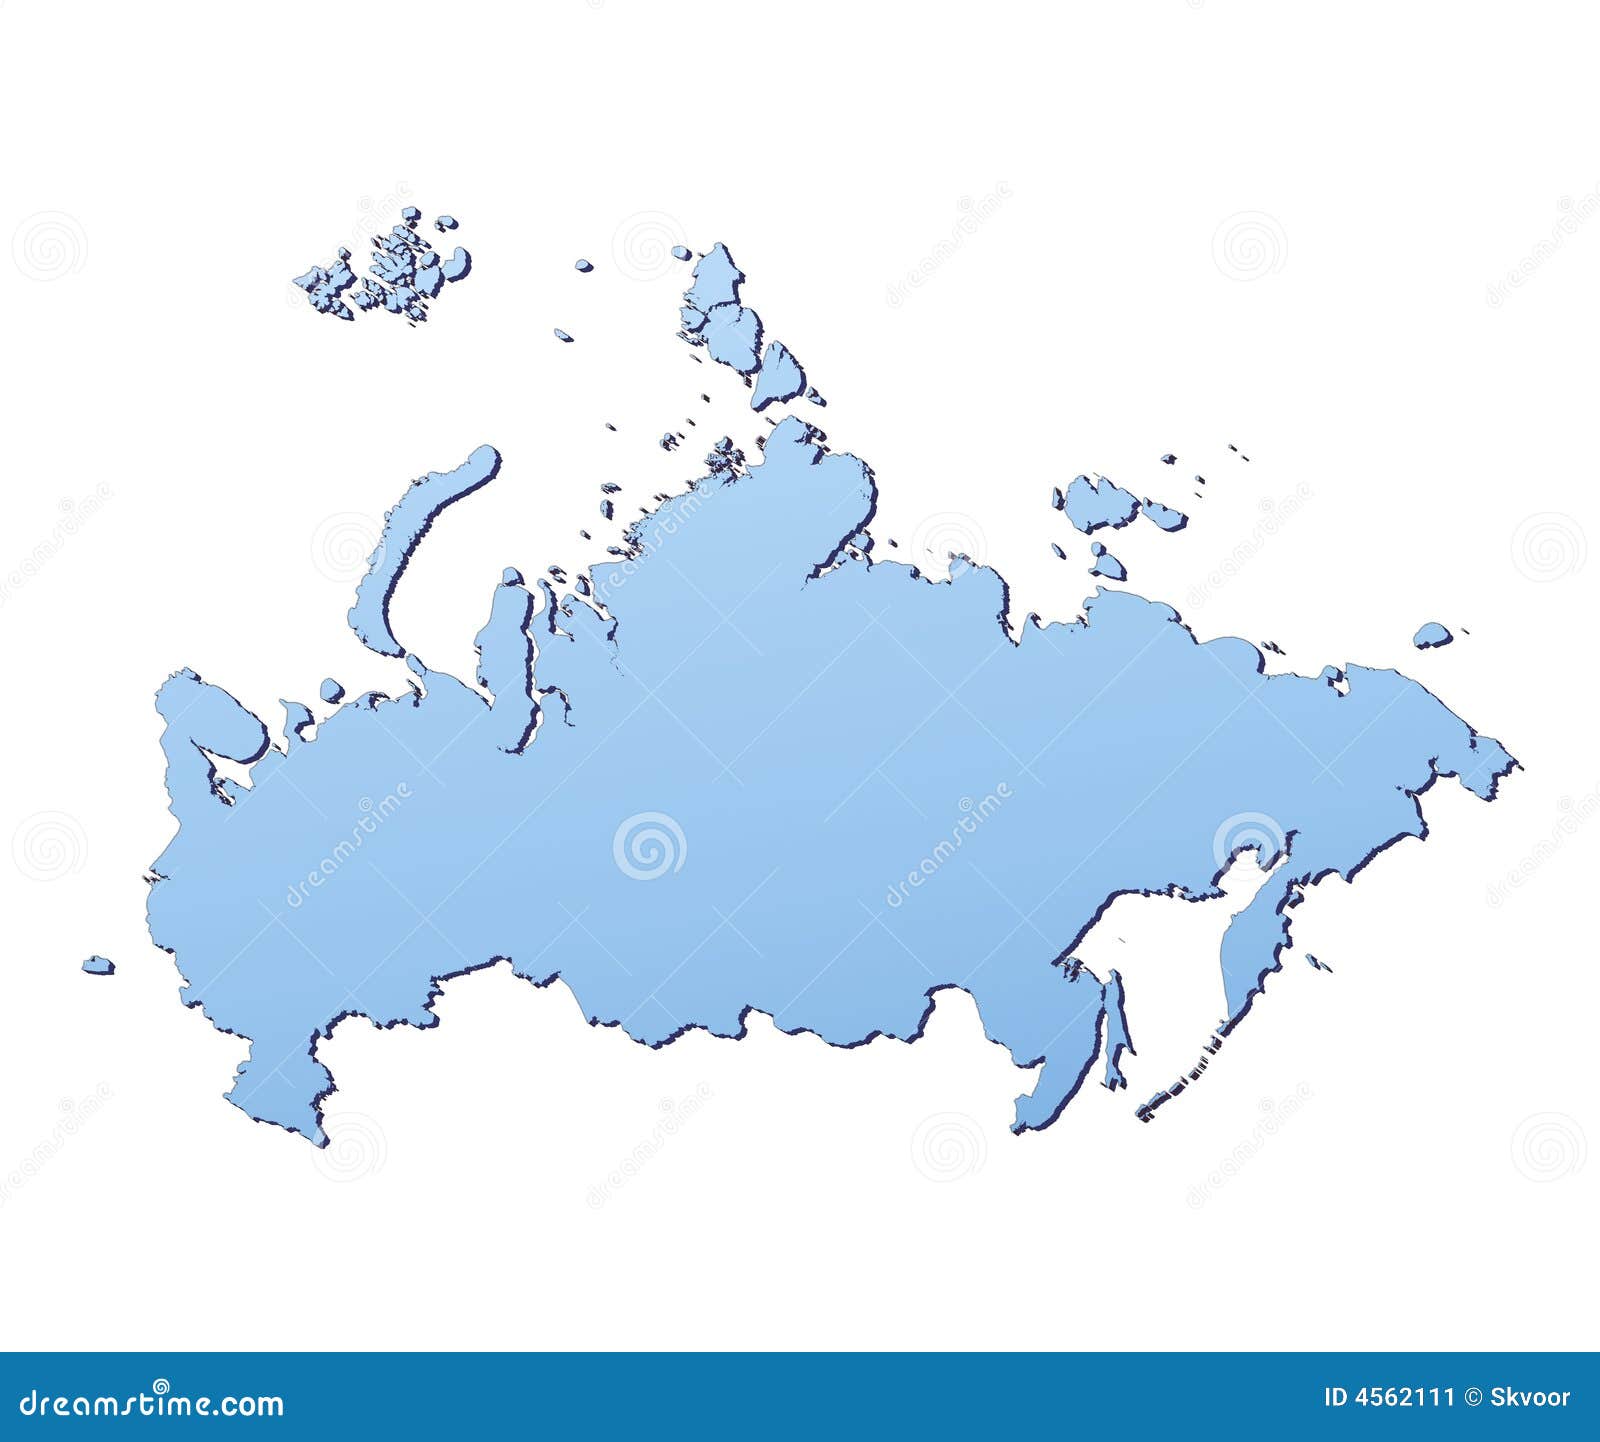 clipart russia map - photo #23